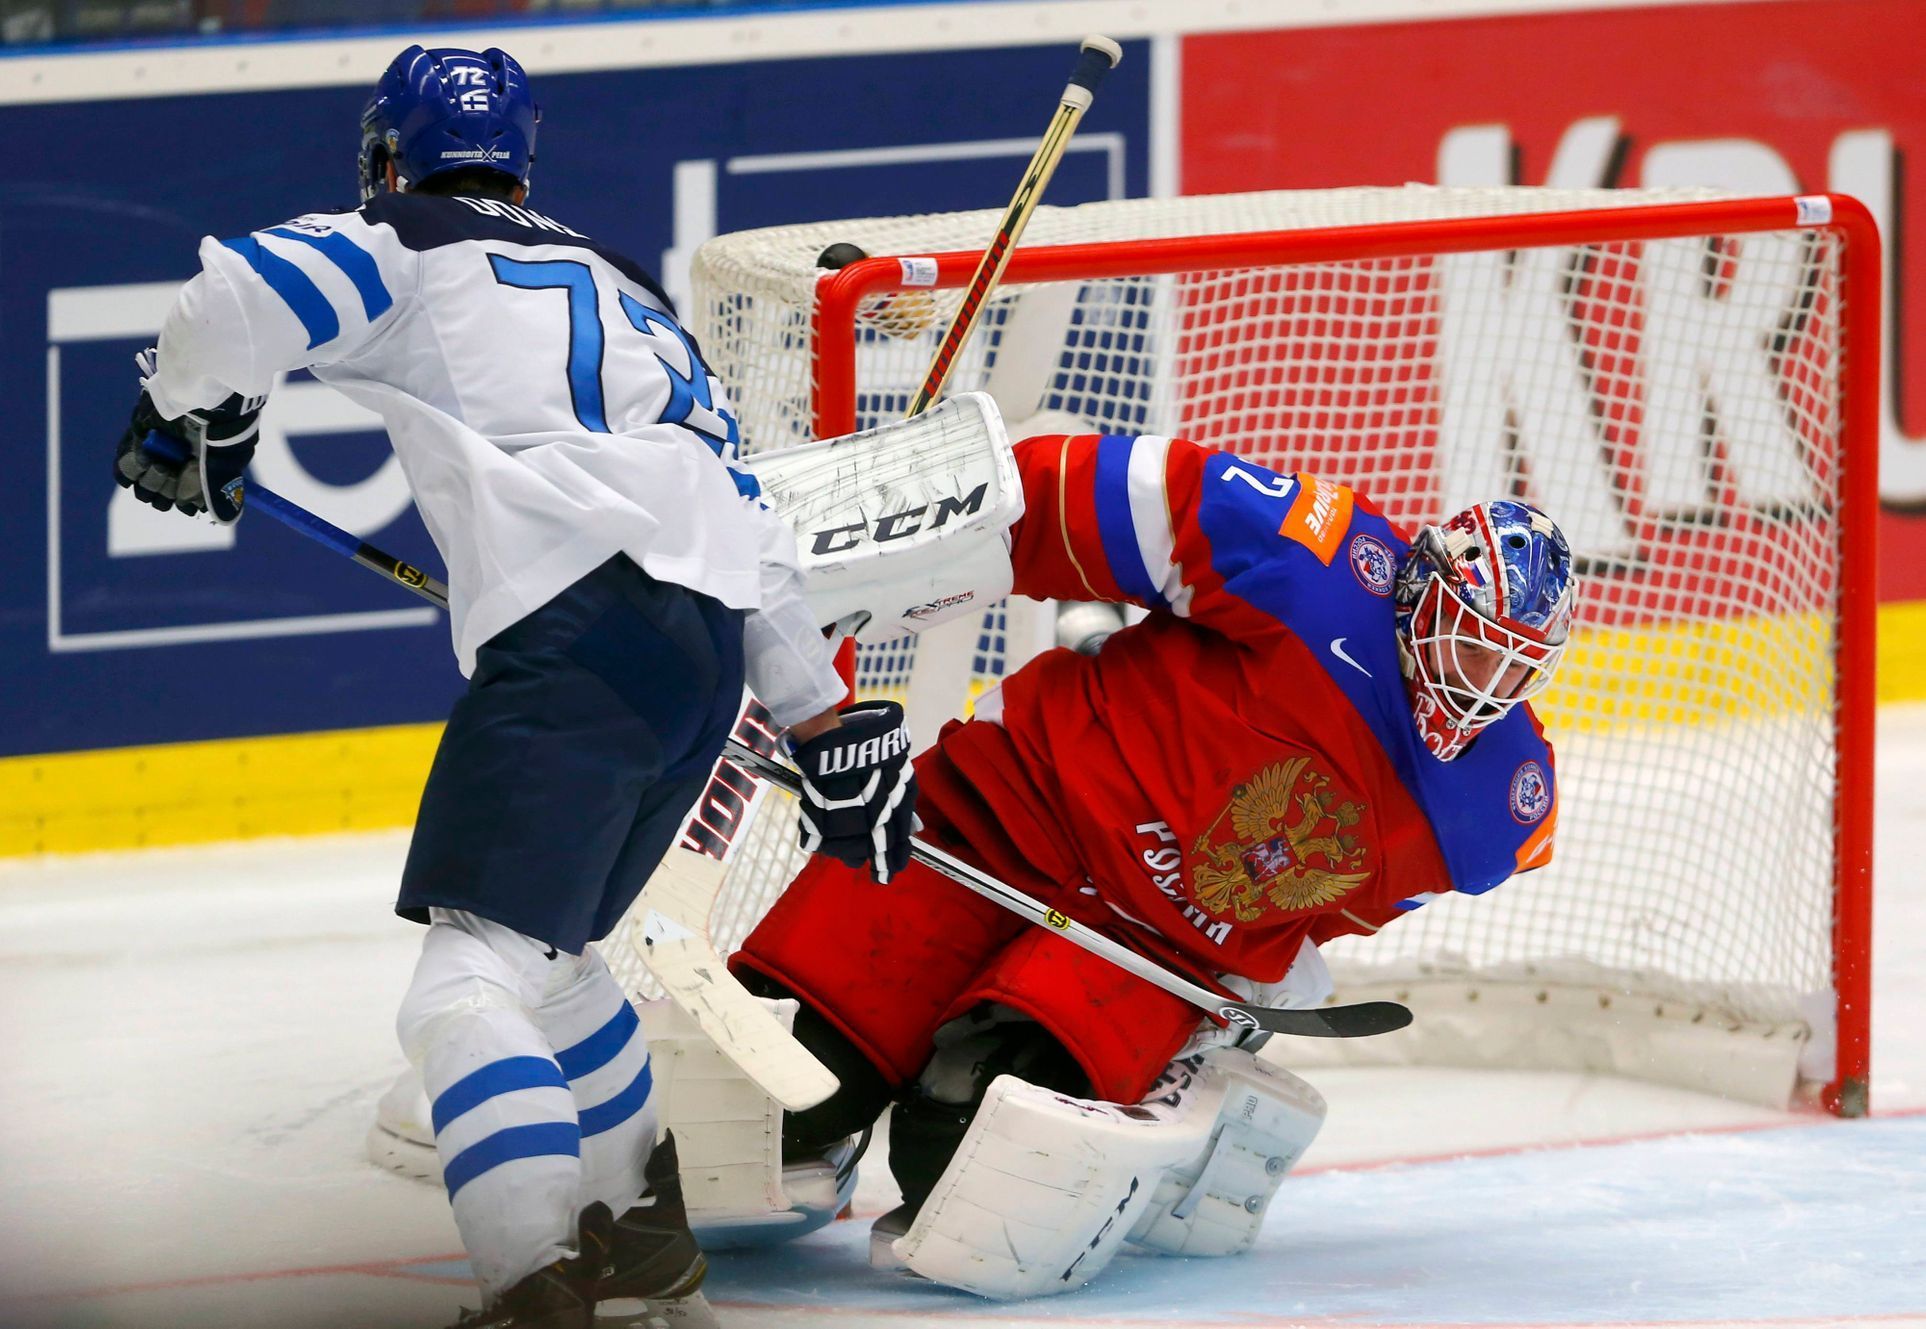 Finland's Donskoi scores the winning penalty goal against Russia's goaltender Bobrovski during their Ice Hockey World Championship game at the CEZ arena in Ostrava